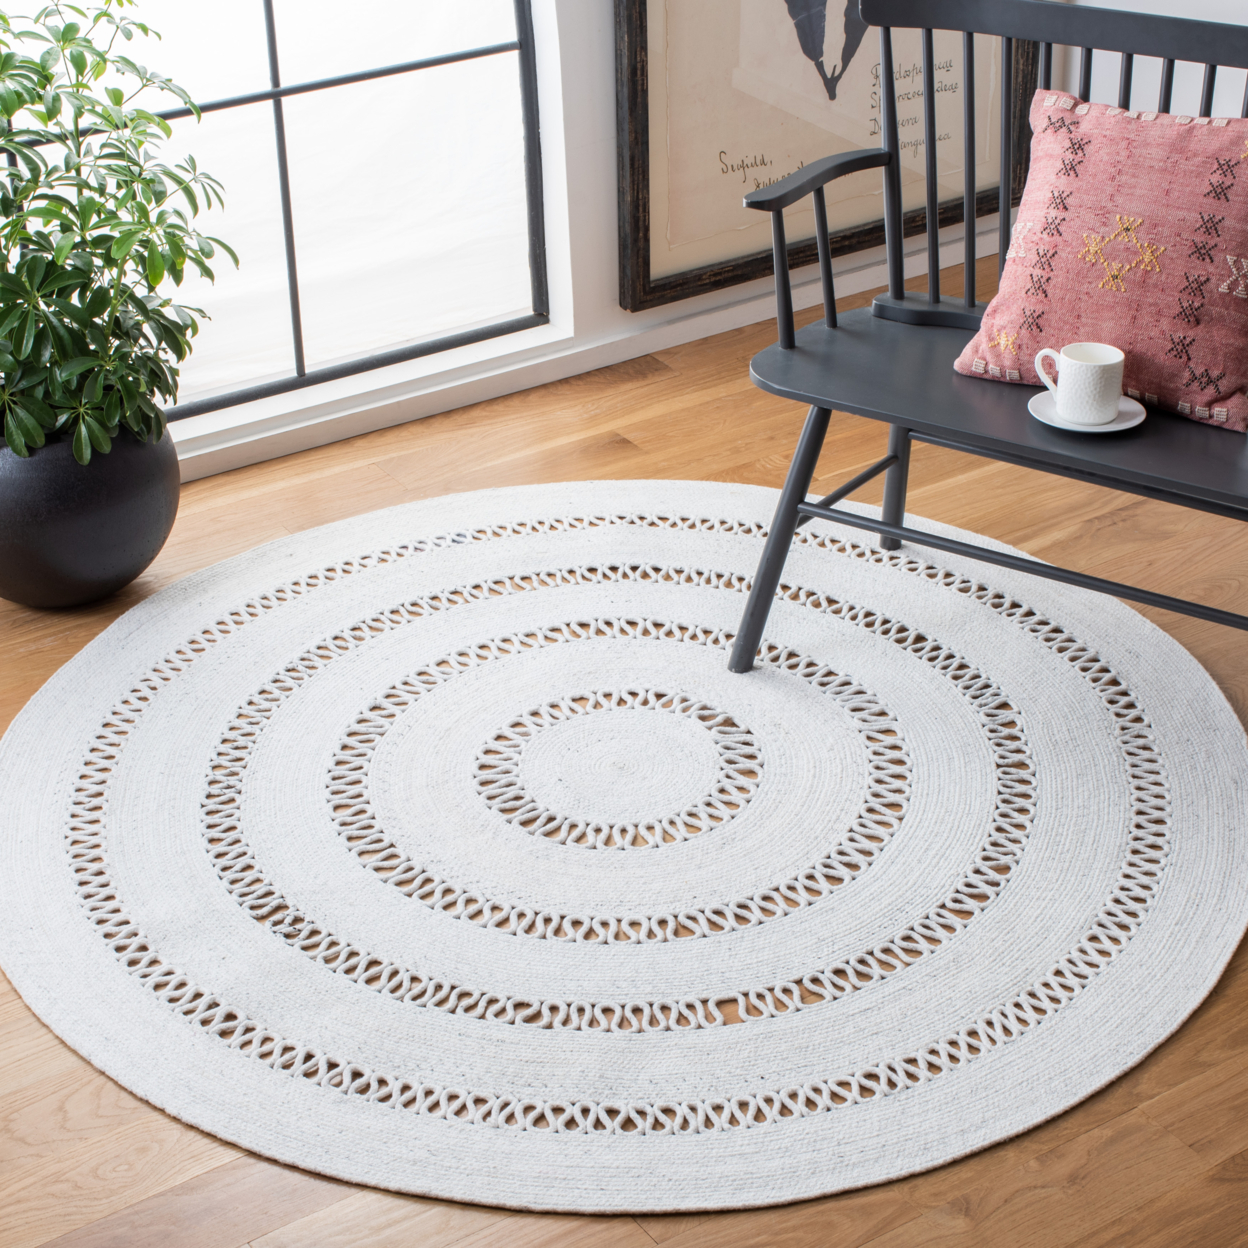 SAFAVIEH Cape Cod Collection CAP221A Handwoven Ivory Rug - 4' Round